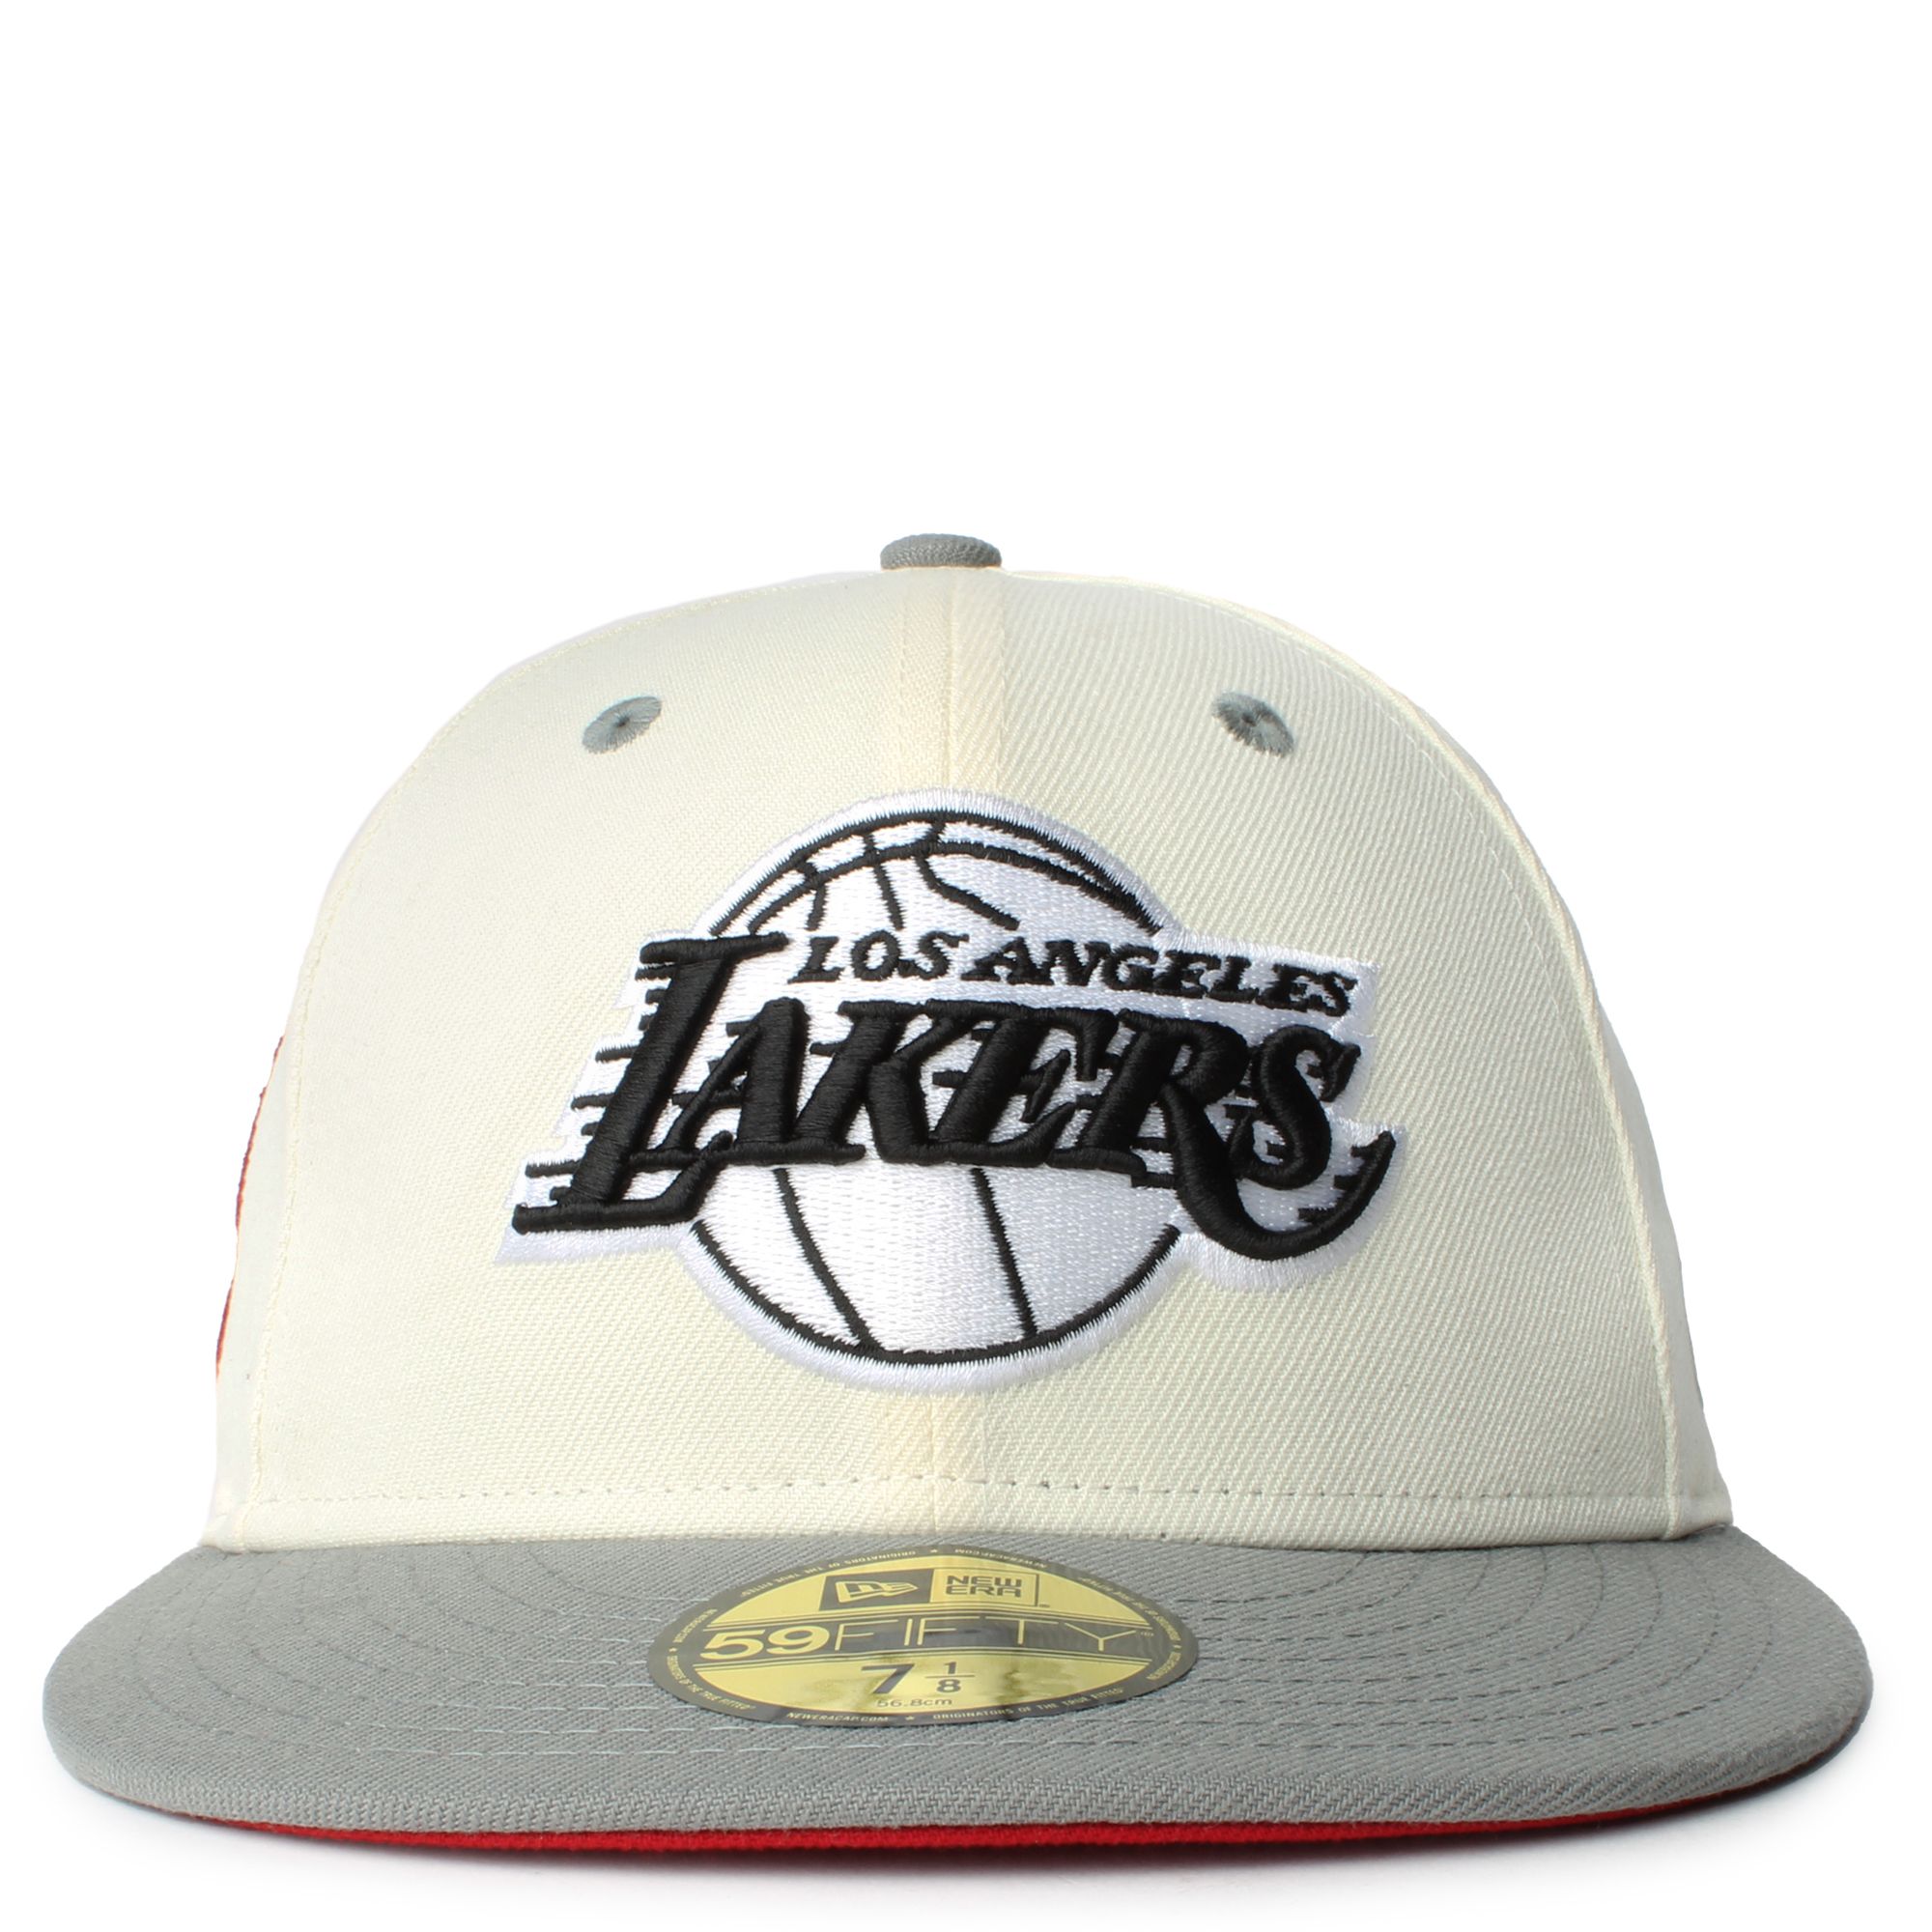 New Era Caps Los Angeles Lakers 59FIFTY Fitted Hat White/Red